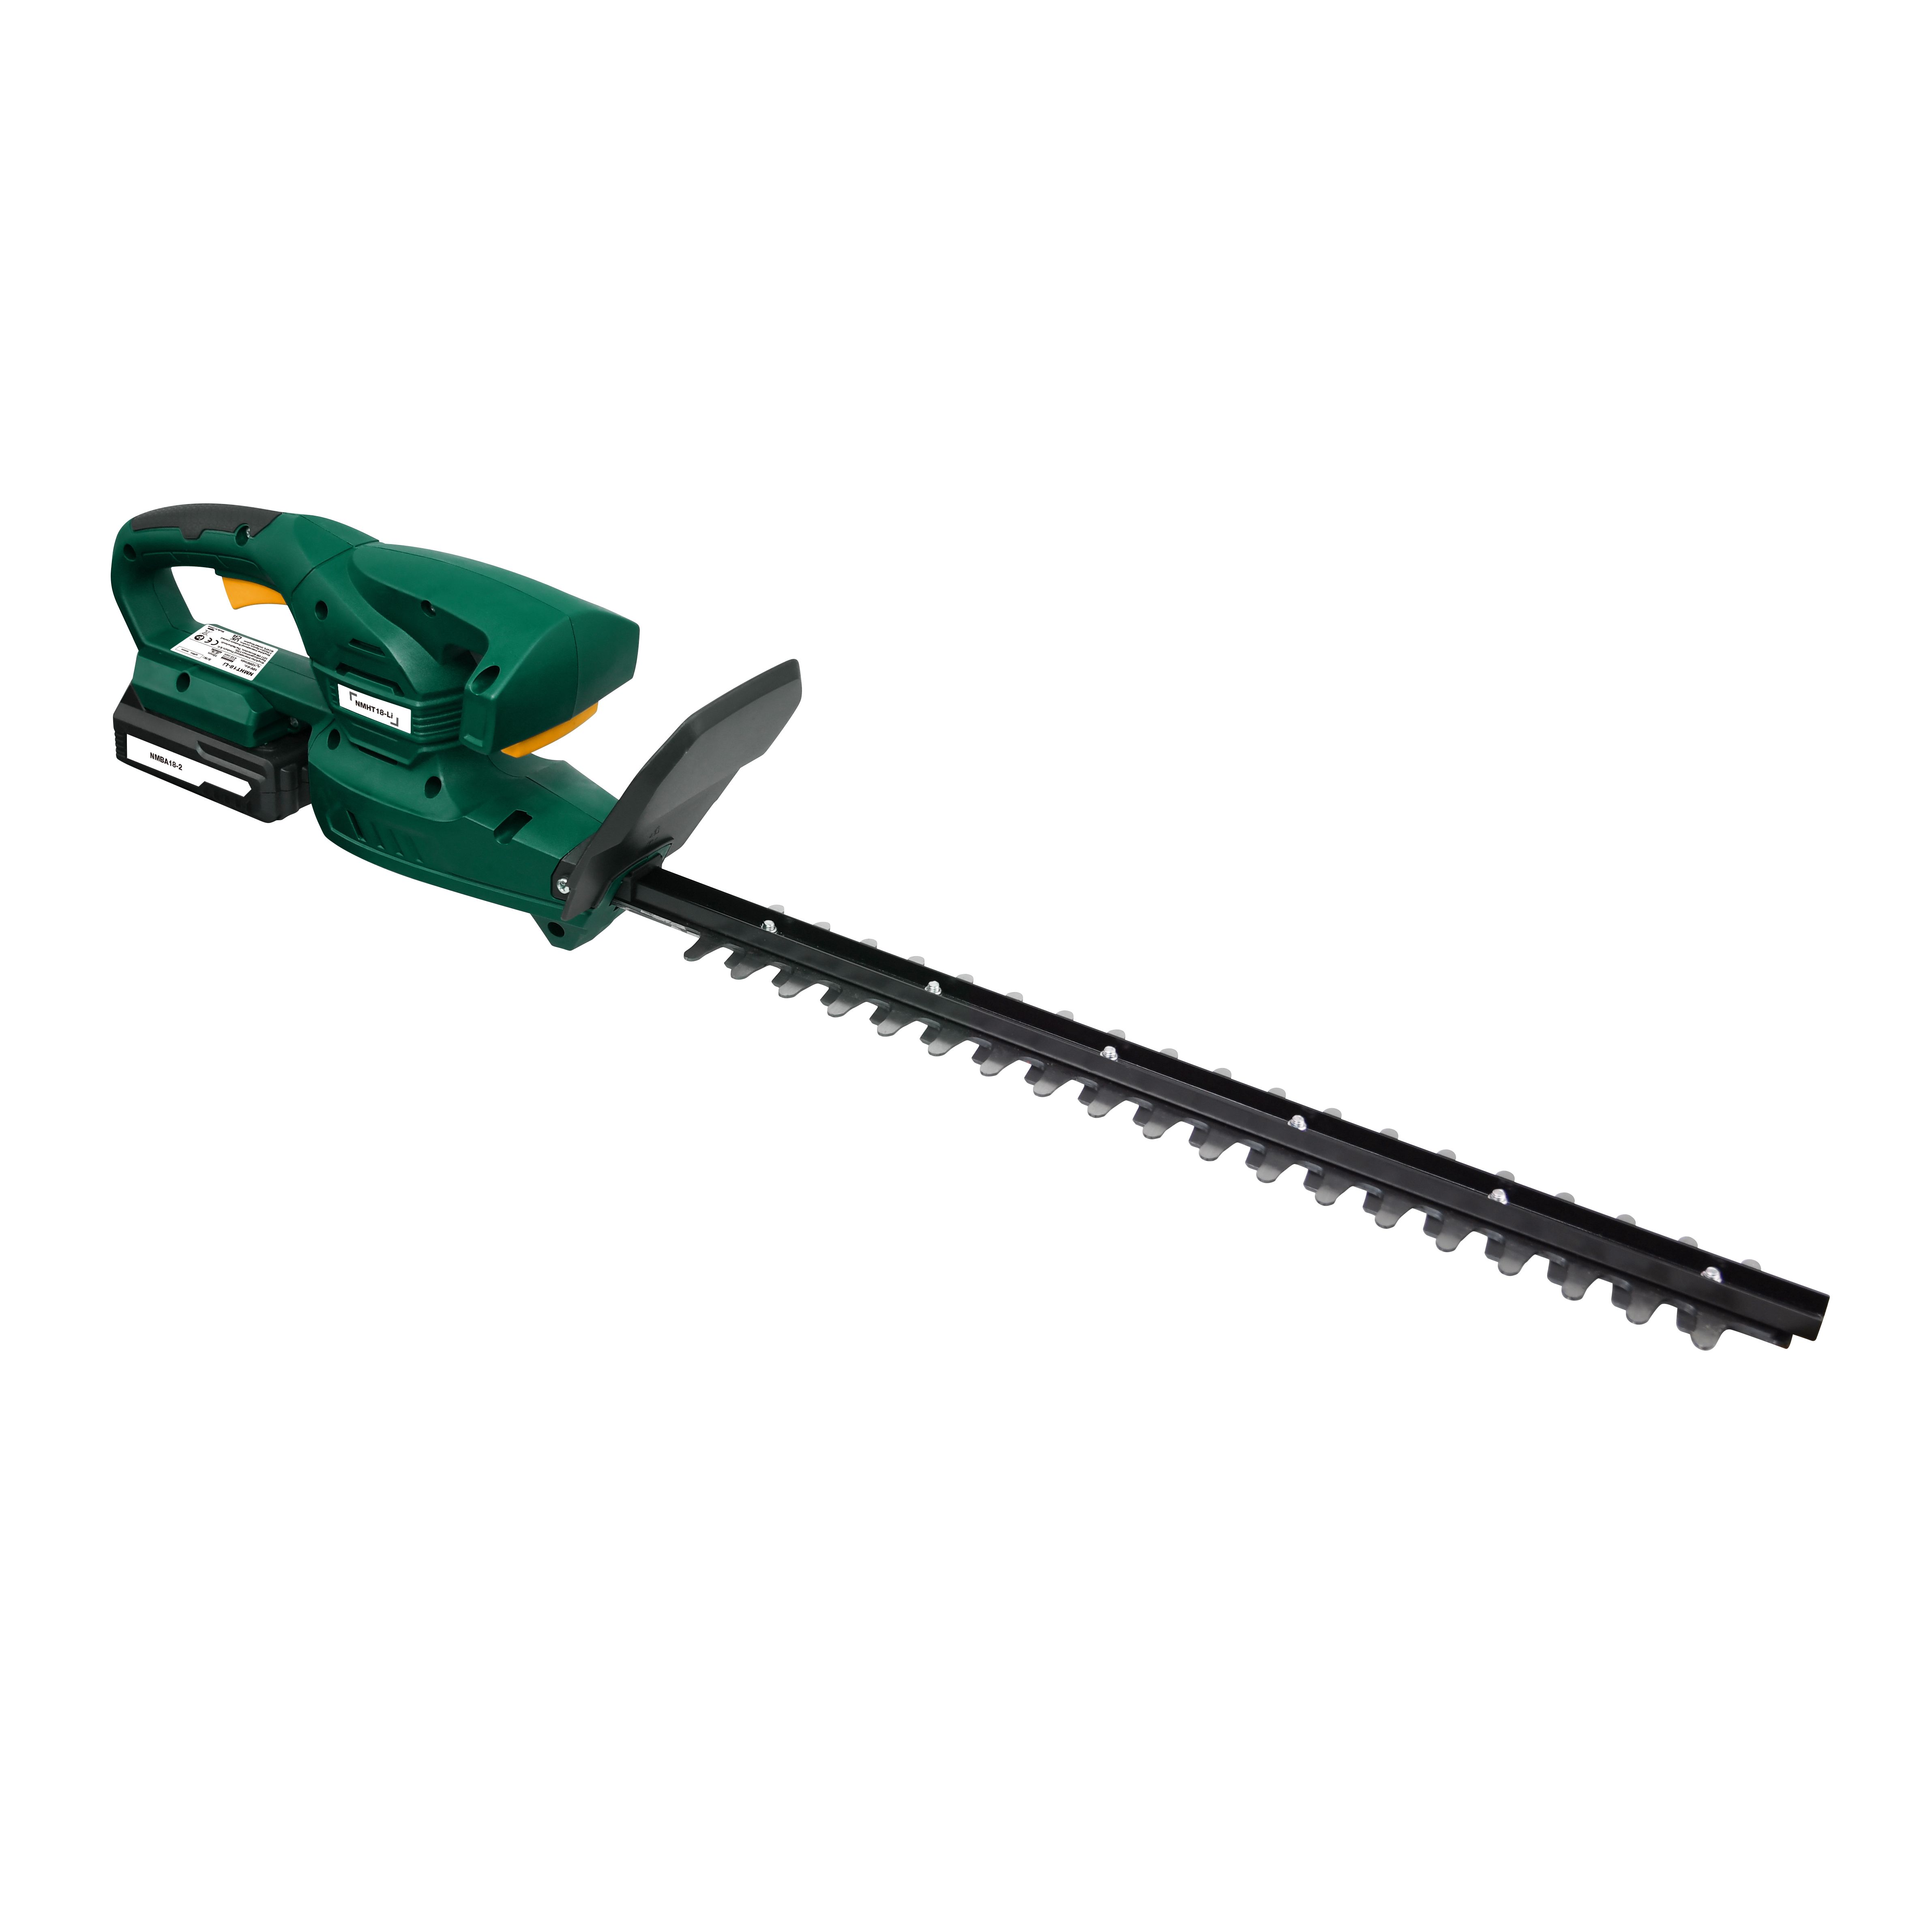 500mm NMHT18-Li Cordless Hedge trimmer